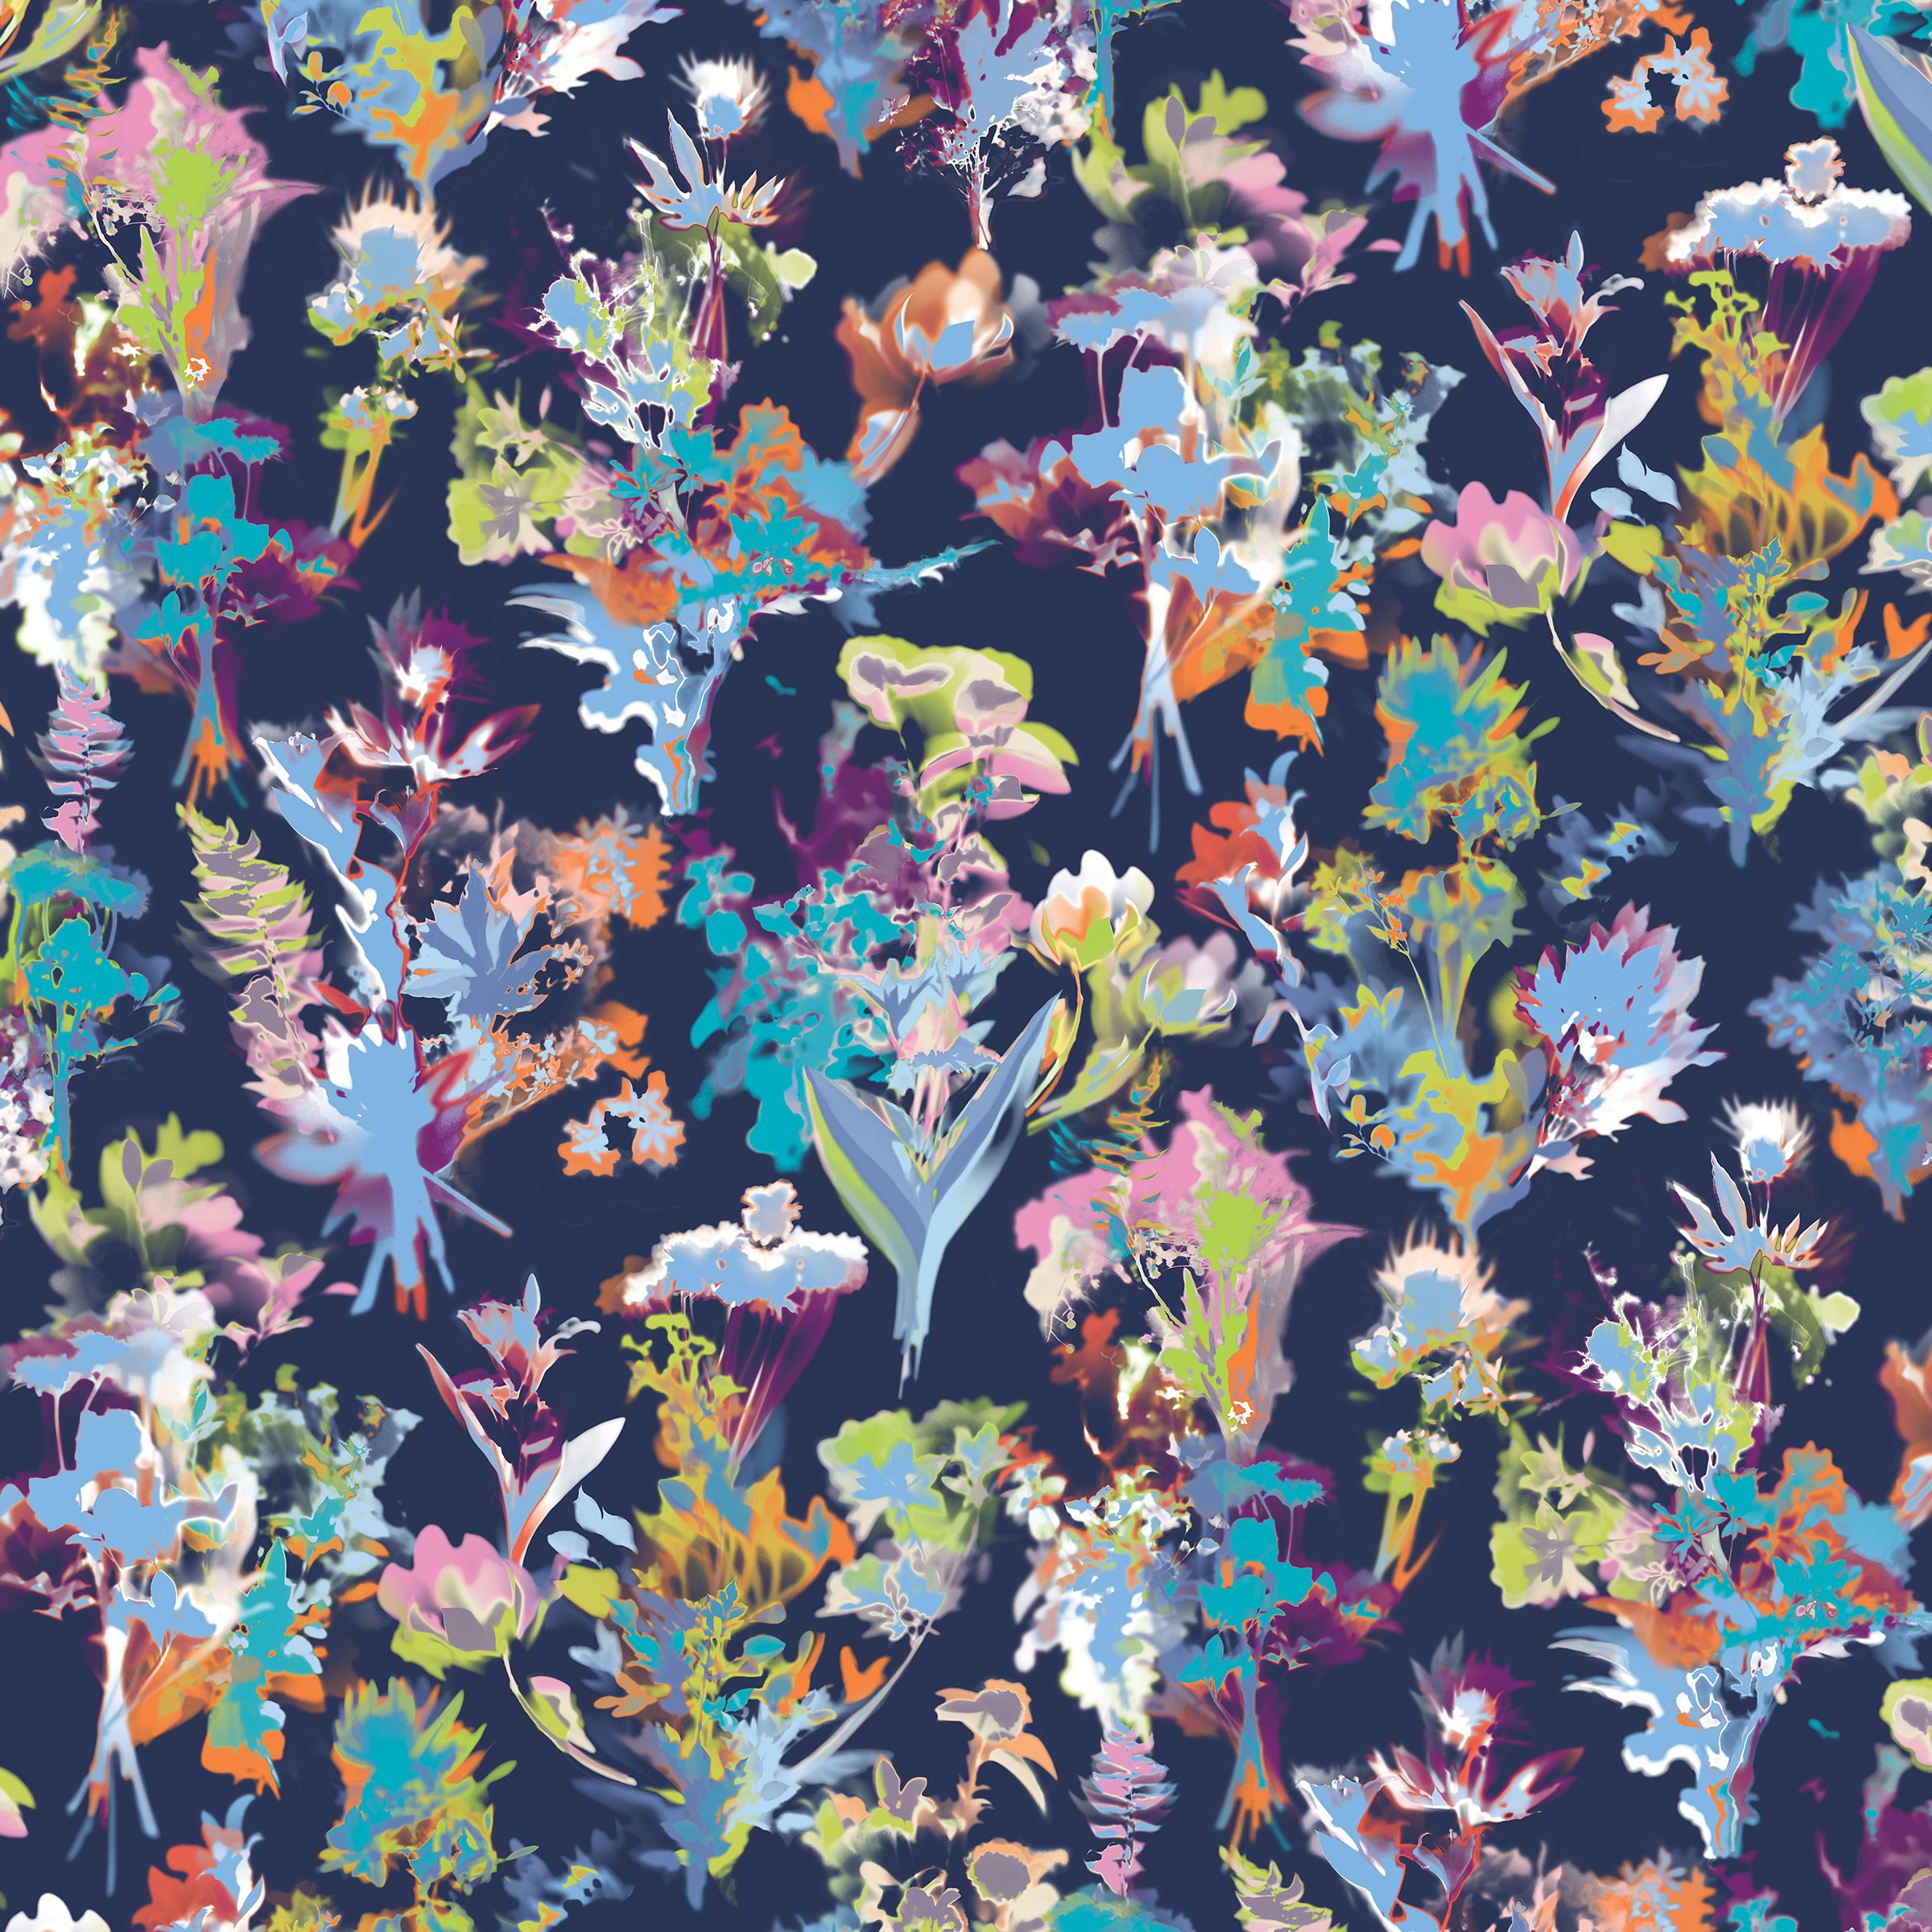 Floral upholstery pattern for interior design. Blue colourway.